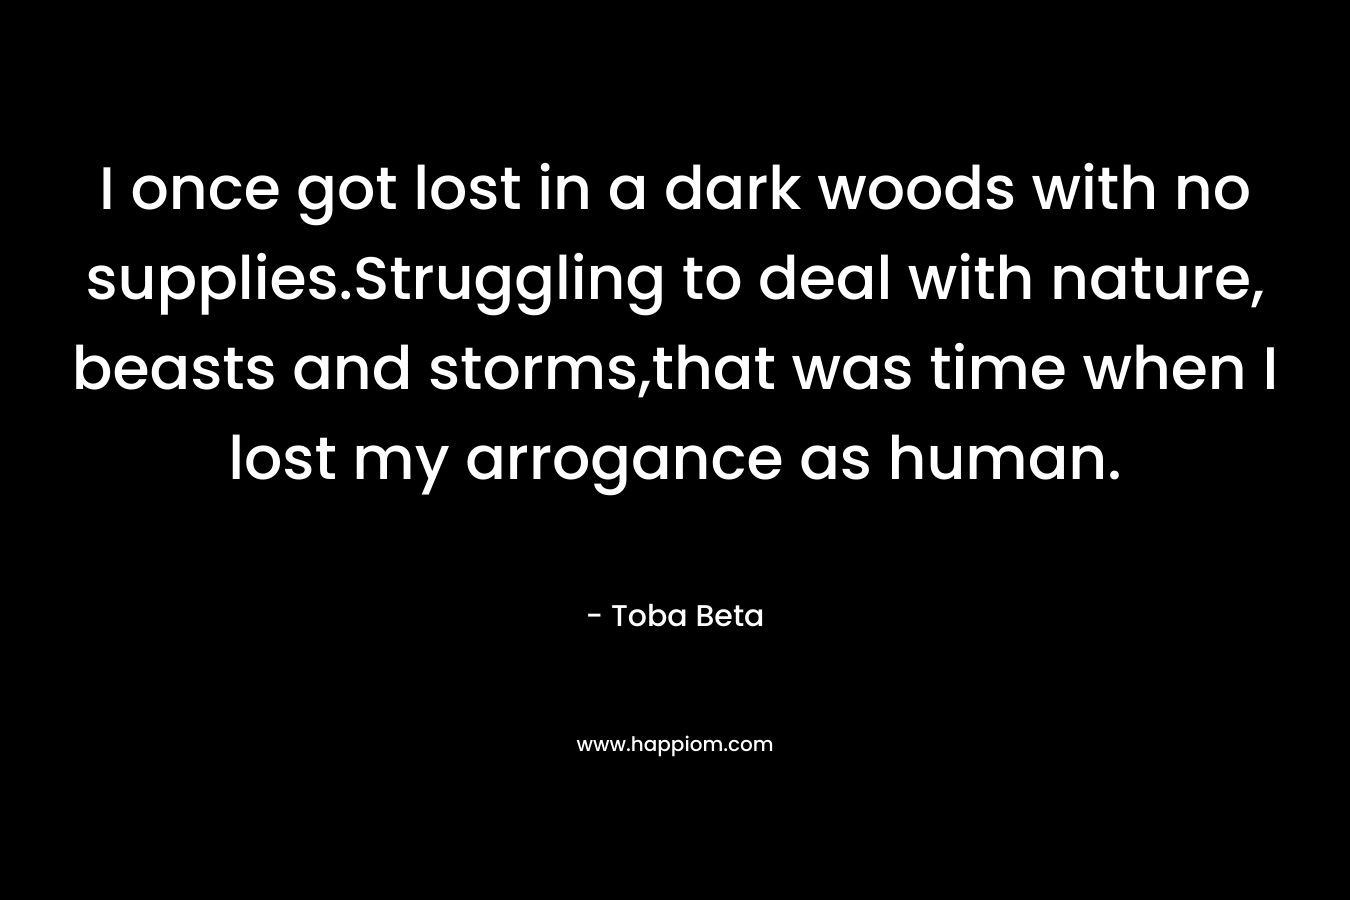 I once got lost in a dark woods with no supplies.Struggling to deal with nature, beasts and storms,that was time when I lost my arrogance as human.